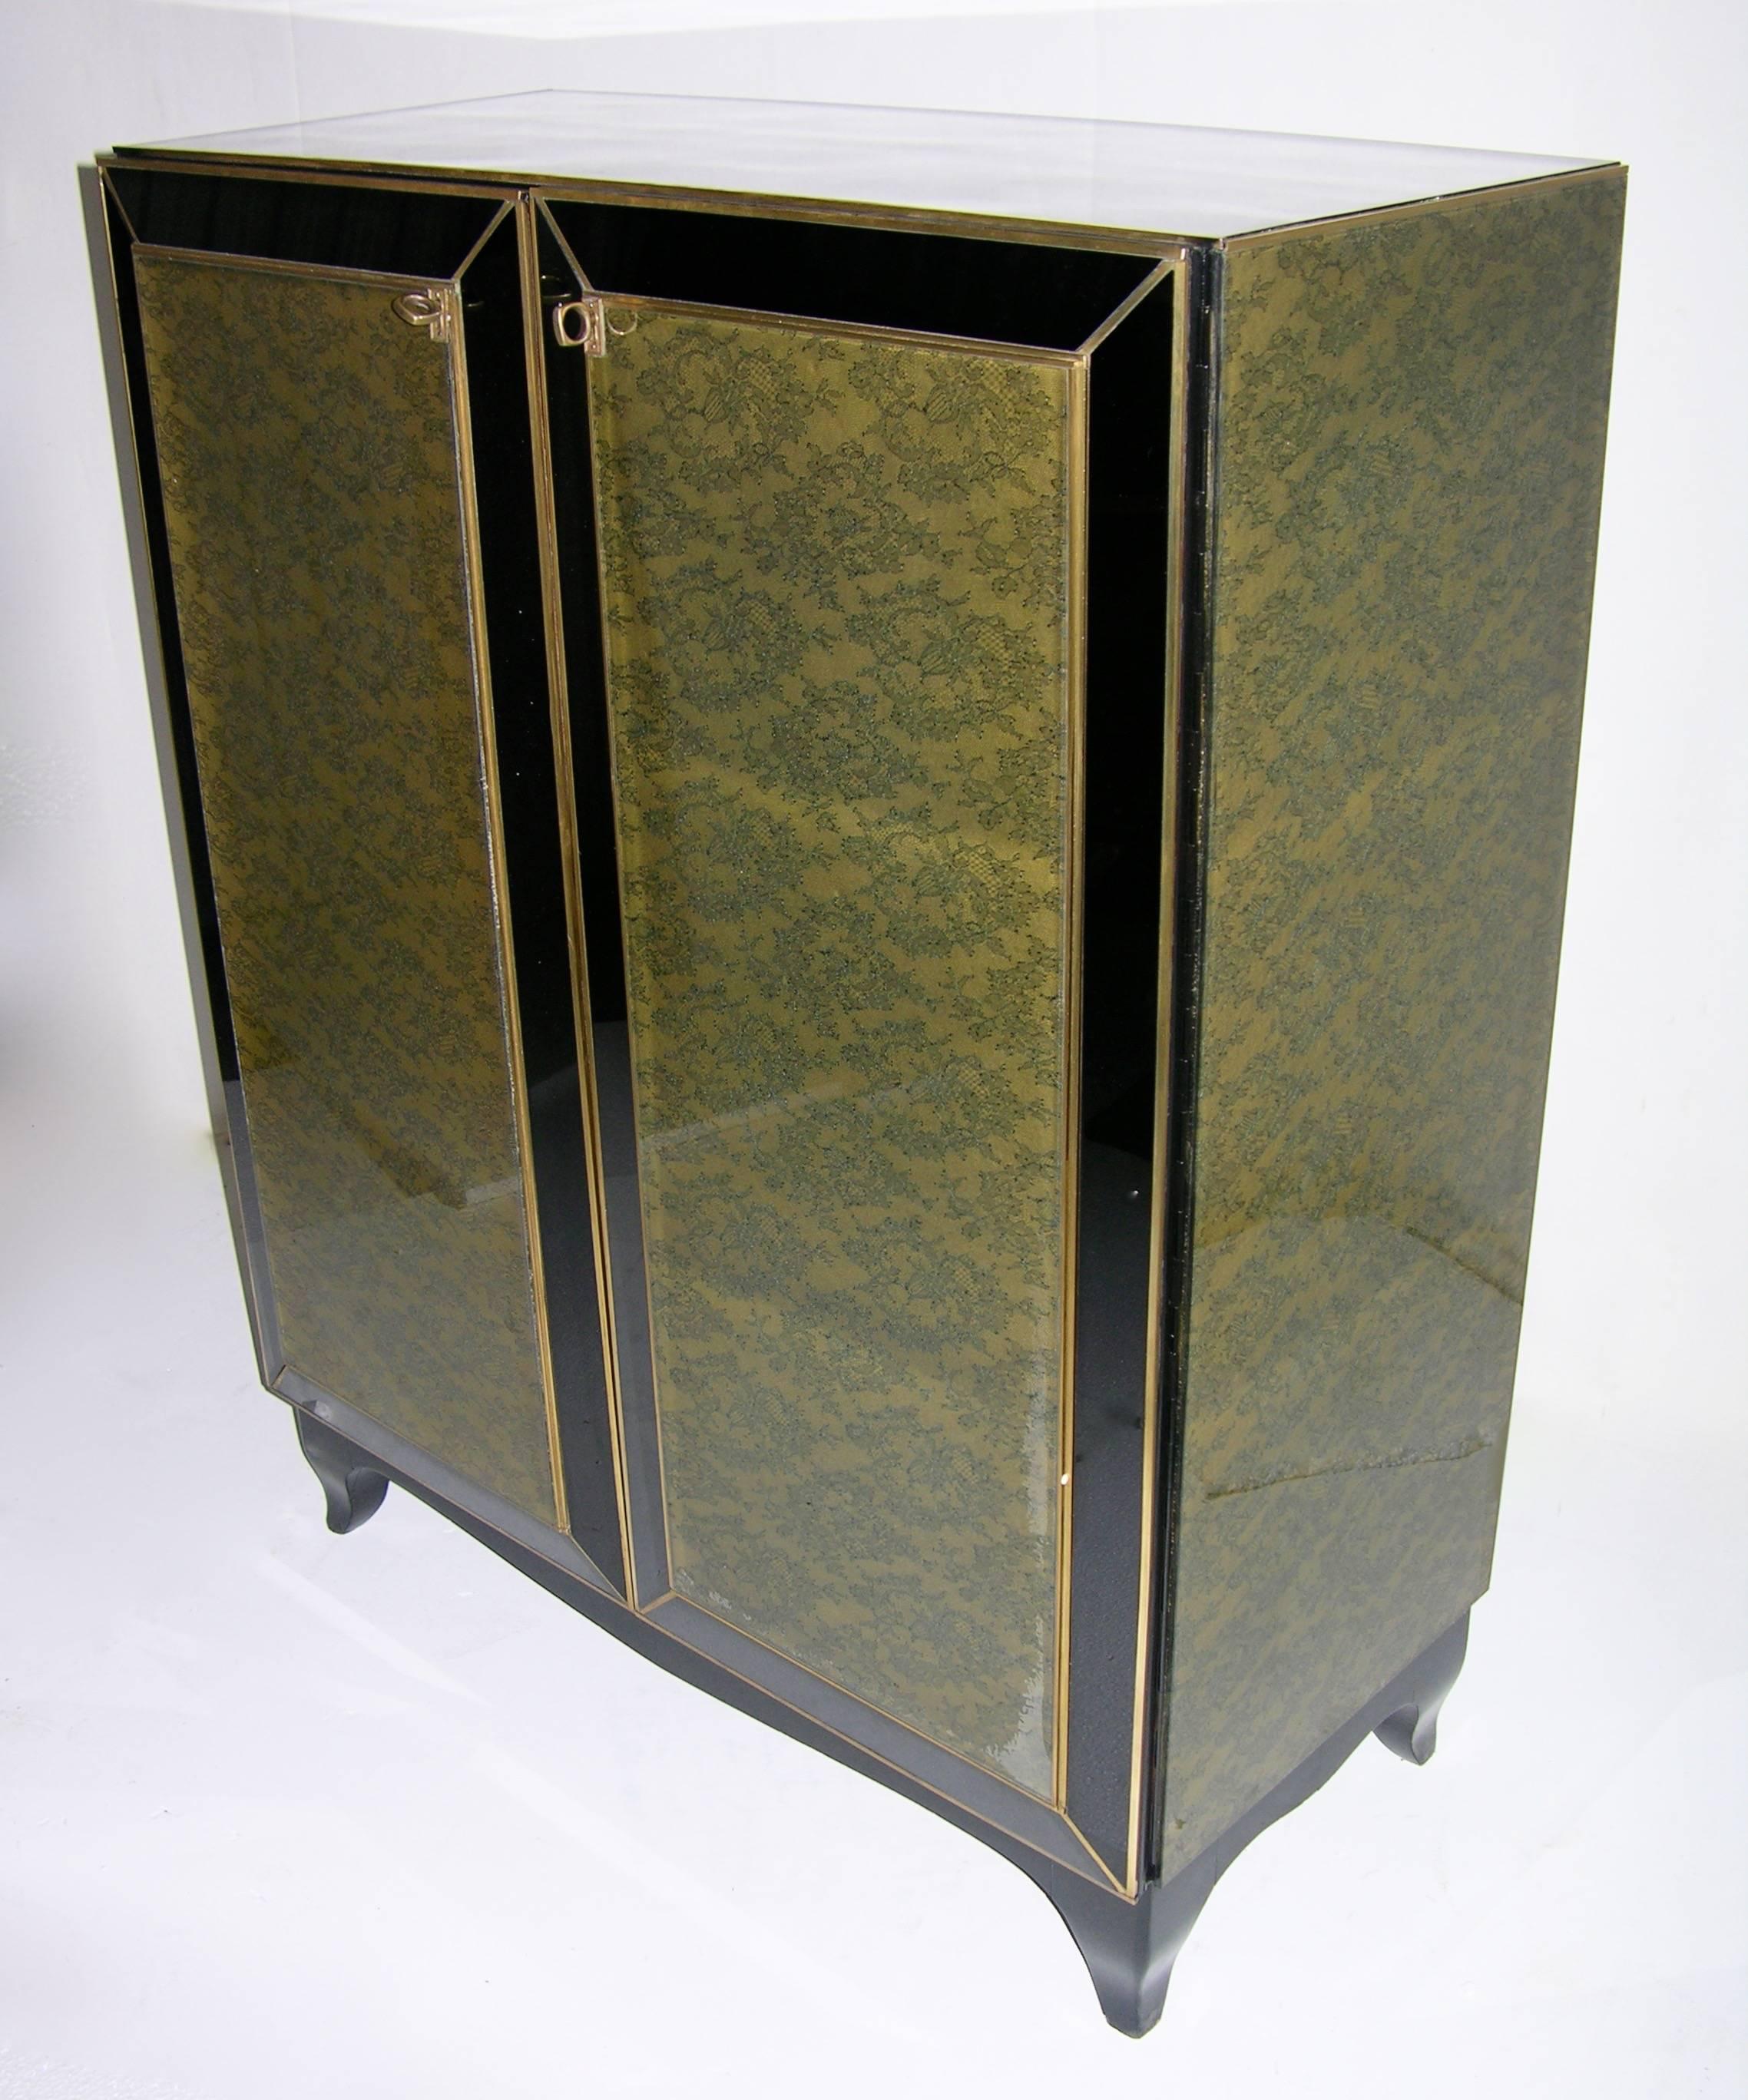 An Italian custom-made credenza/buffet, very rare decor with sides and front decorated with olive green lace over an elegant musk green fabric under glass panels, the surround in black glass highlighted with bronze inlays, on scrolled black